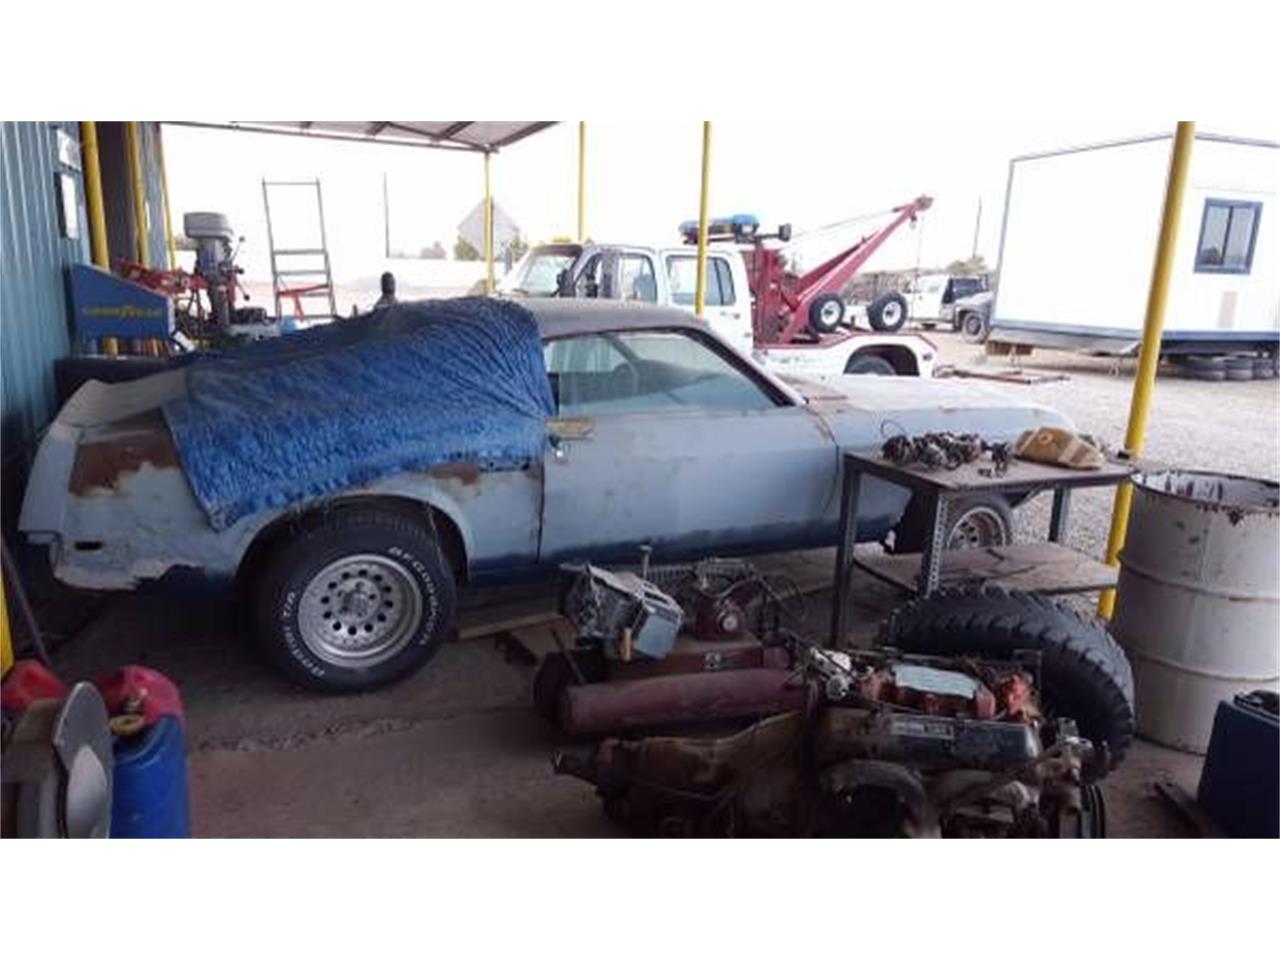 1969 Ford Mustang for sale in Cadillac, MI